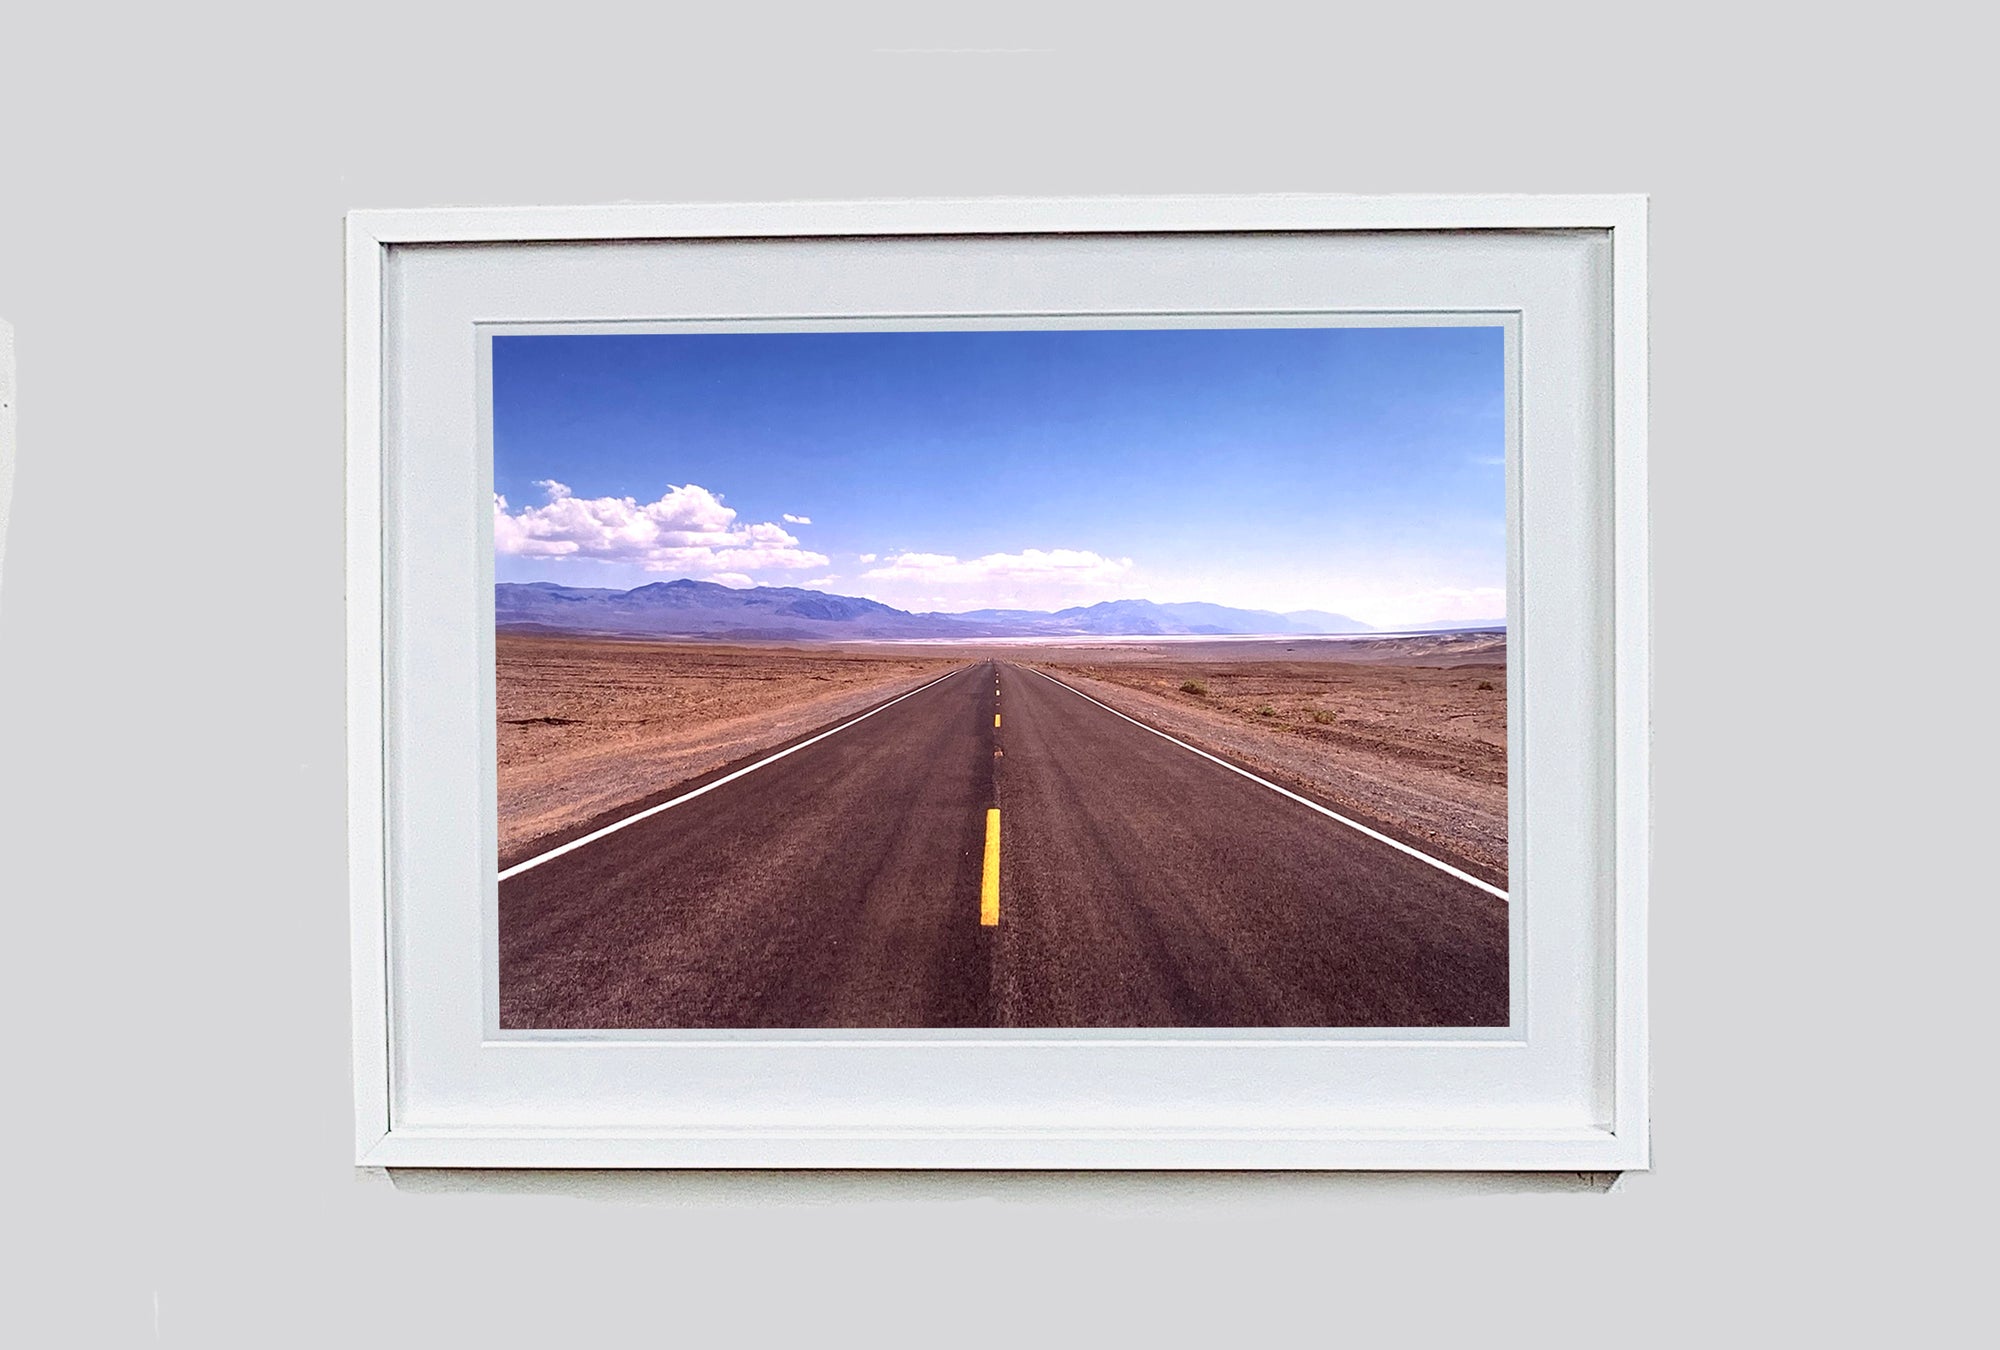 'The Road to Death Valley', taken in the Majova Desert, California, features a clouded blue sky met my mountains on the horizon. This American landscape artwork is part of Richard Heeps' 'Dream in Colour' series.